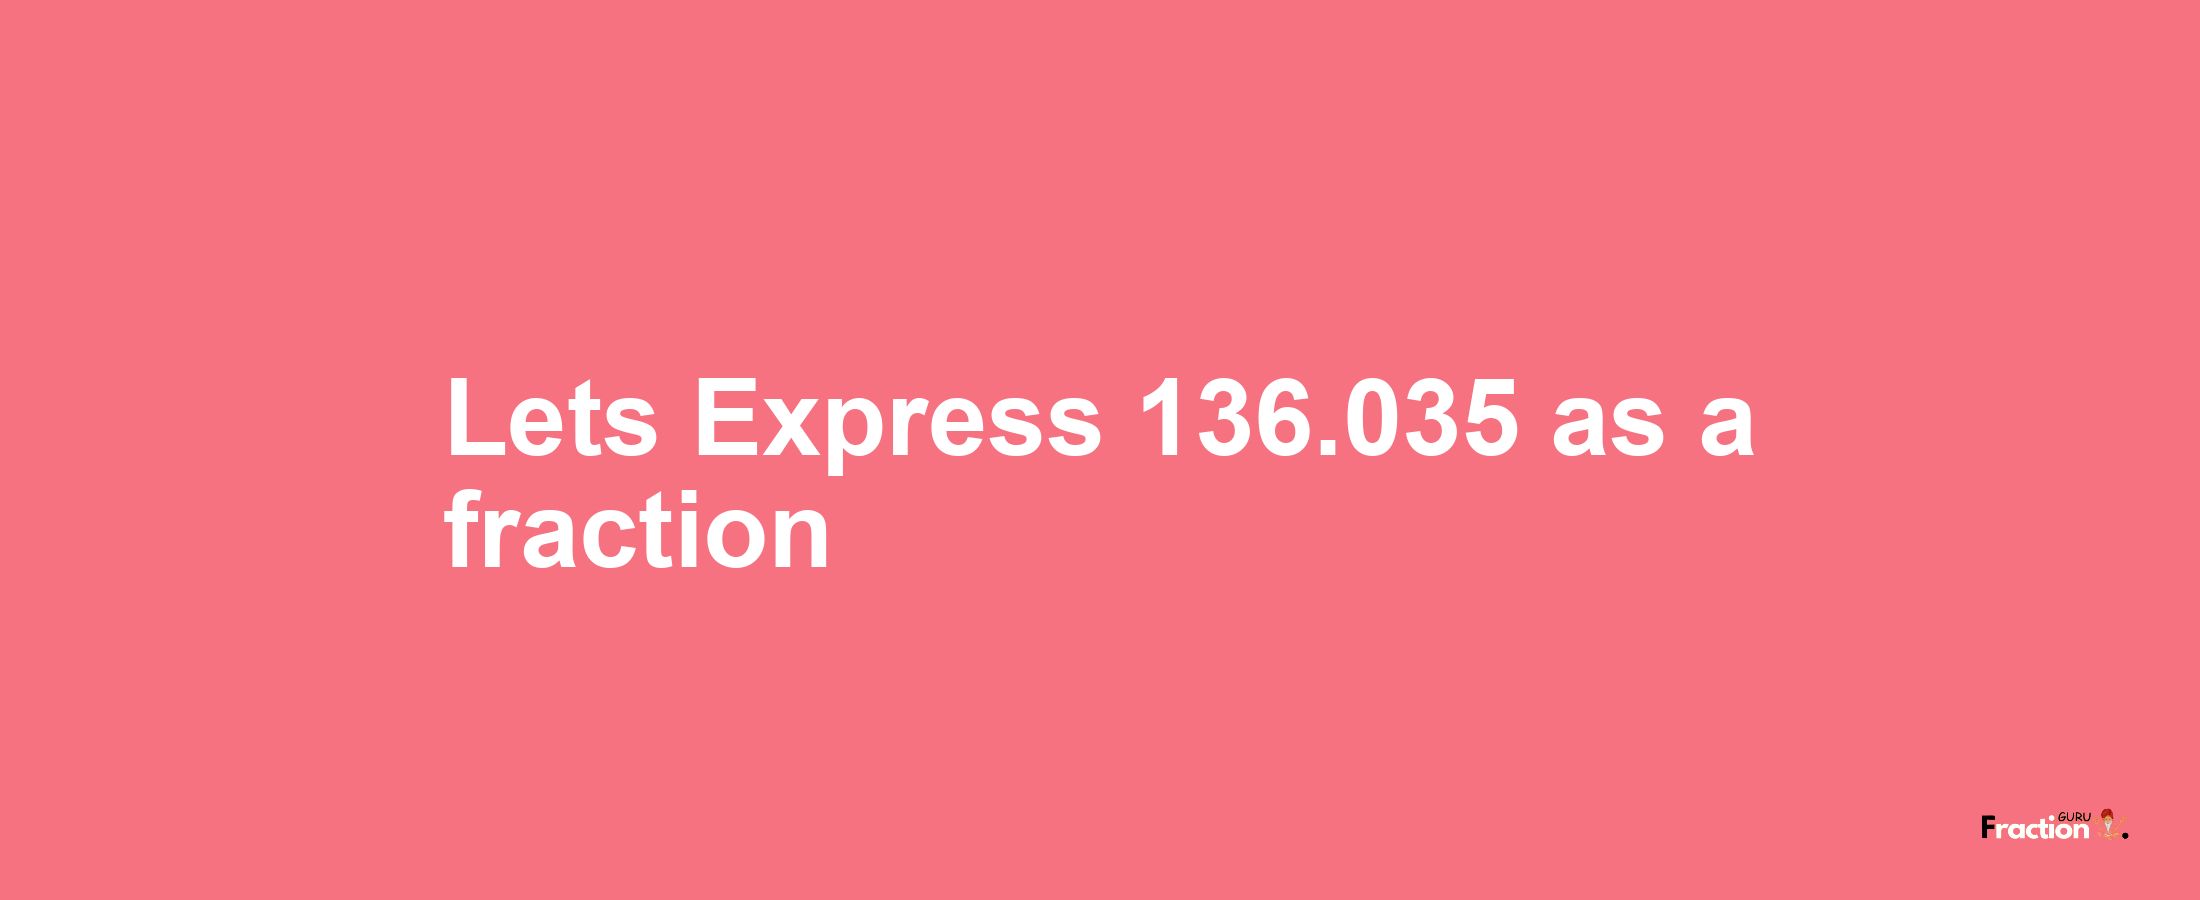 Lets Express 136.035 as afraction